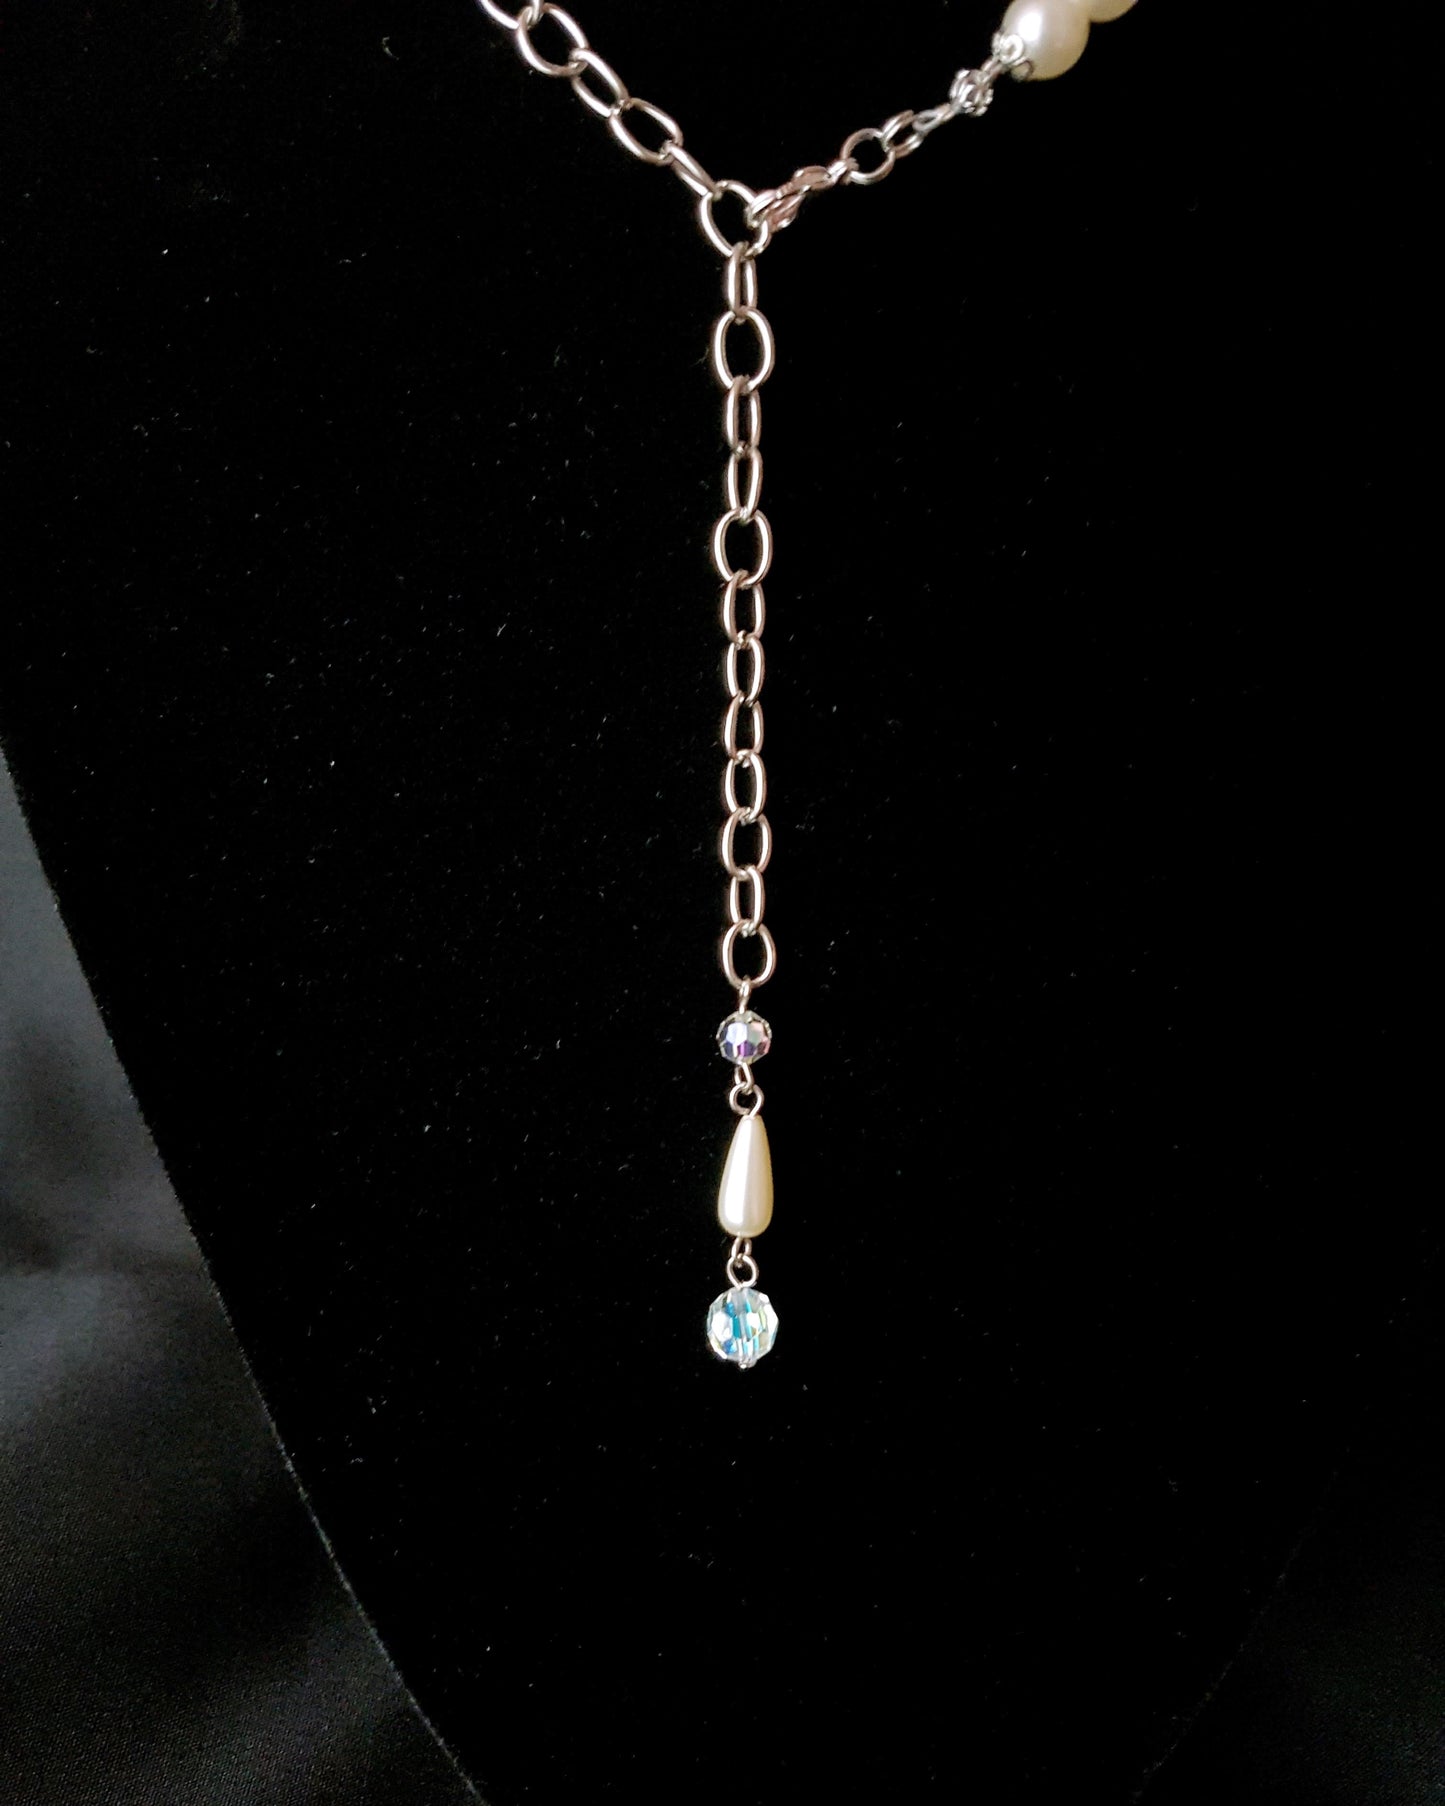 Pearl Crystal Elaborate Beaded Collar Necklace and Earring Set, this is  a photo of the back of the necklace, showing back chain extension and lobster claw clasp.